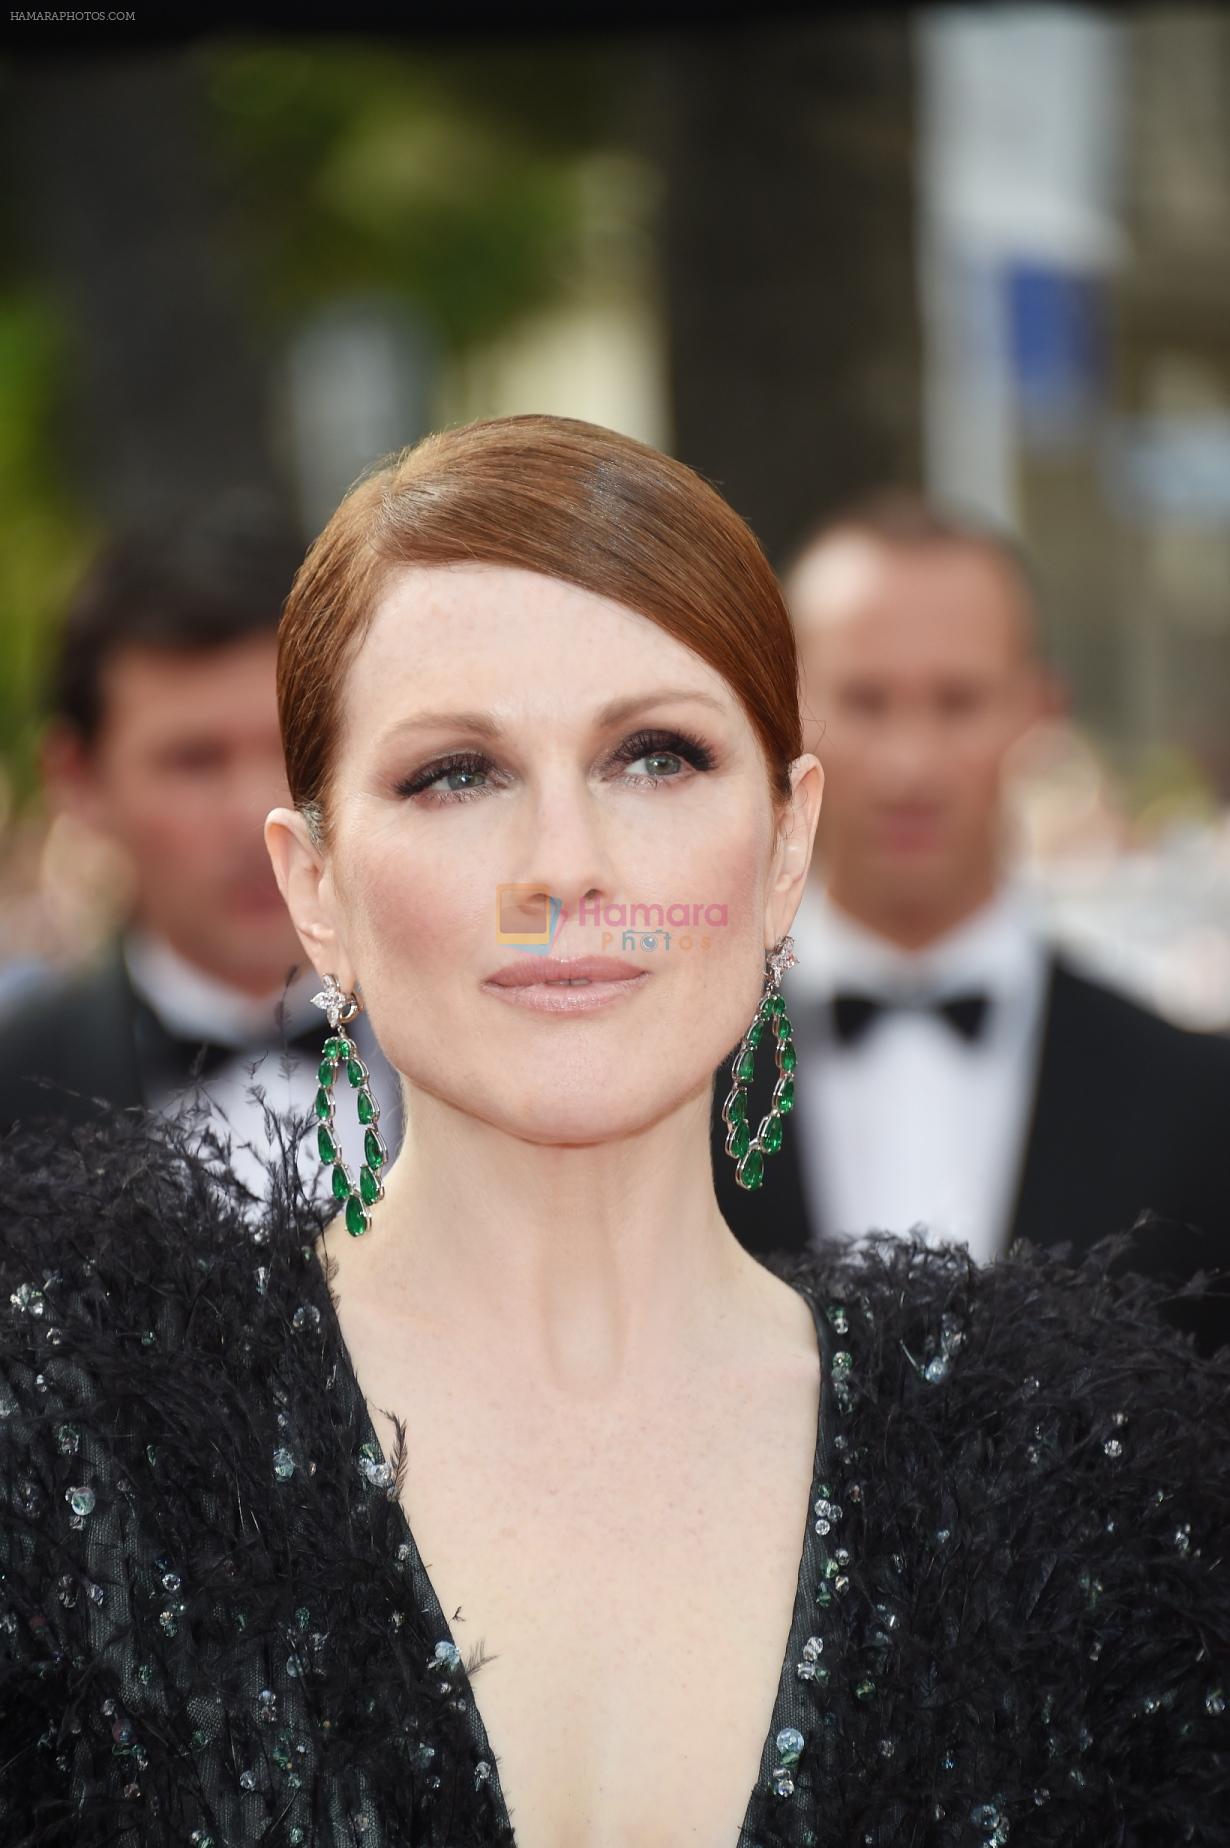 Julianne Moore on Day 1 at Cannes Film Festival 2015 Red Carpet